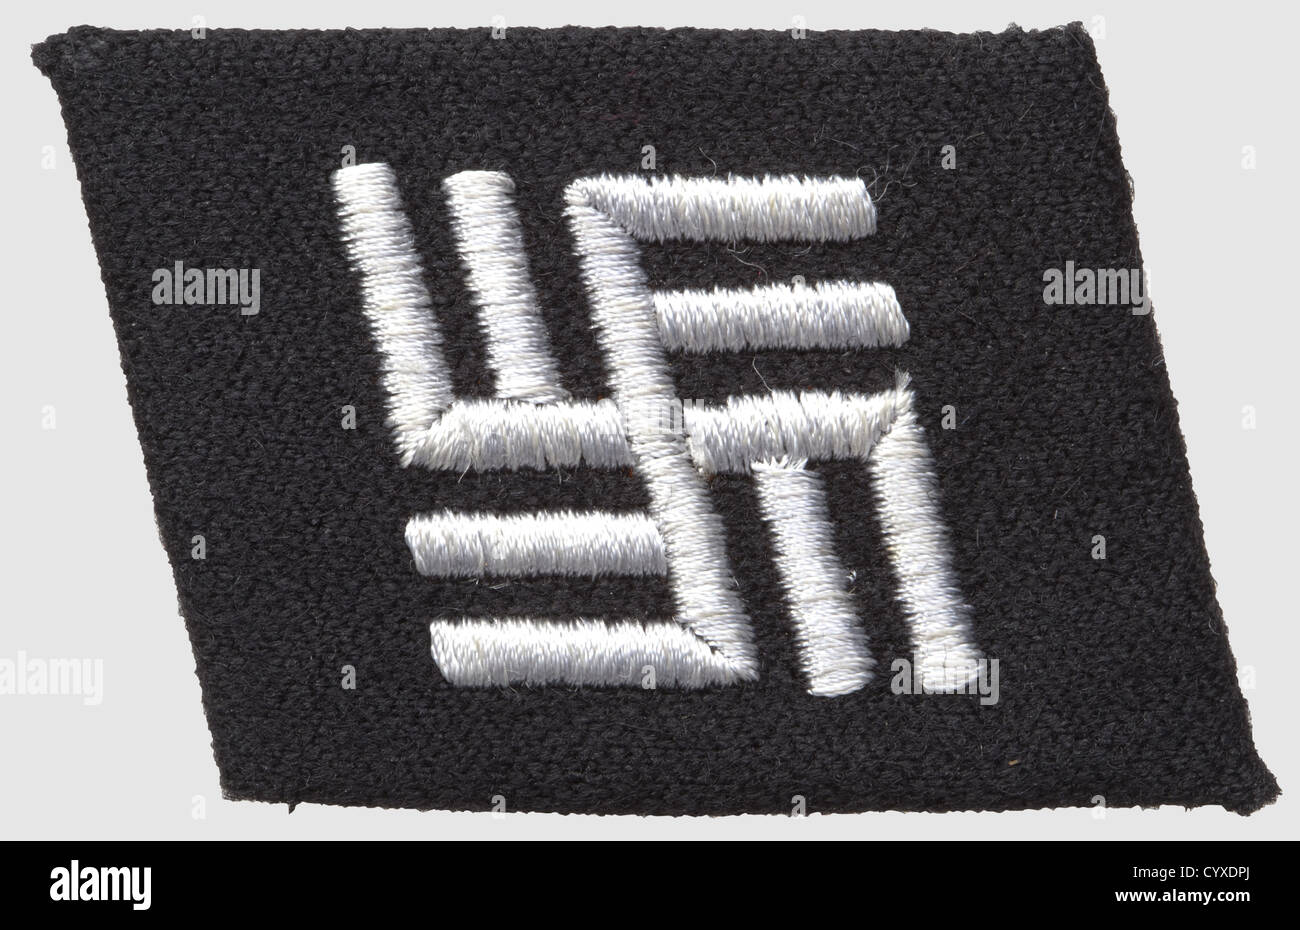 Collar patch for concentration camp guard personnel, of black wool with RZM-machine-embroidered double-svastika motif, historic, historical, 1930s, 1930s, 20th century, SS, Schutzstaffel, NS, National Socialism, Nazism, Third Reich, German Reich, branch of service, branches of service, organisation, organization, organizations, organisations, object, objects, clipping, cut out, cut-out, cut-outs, insignia, symbol, symbols, equipment, uniform, uniforms, detail, details, Additional-Rights-Clearences-Not Available Stock Photo